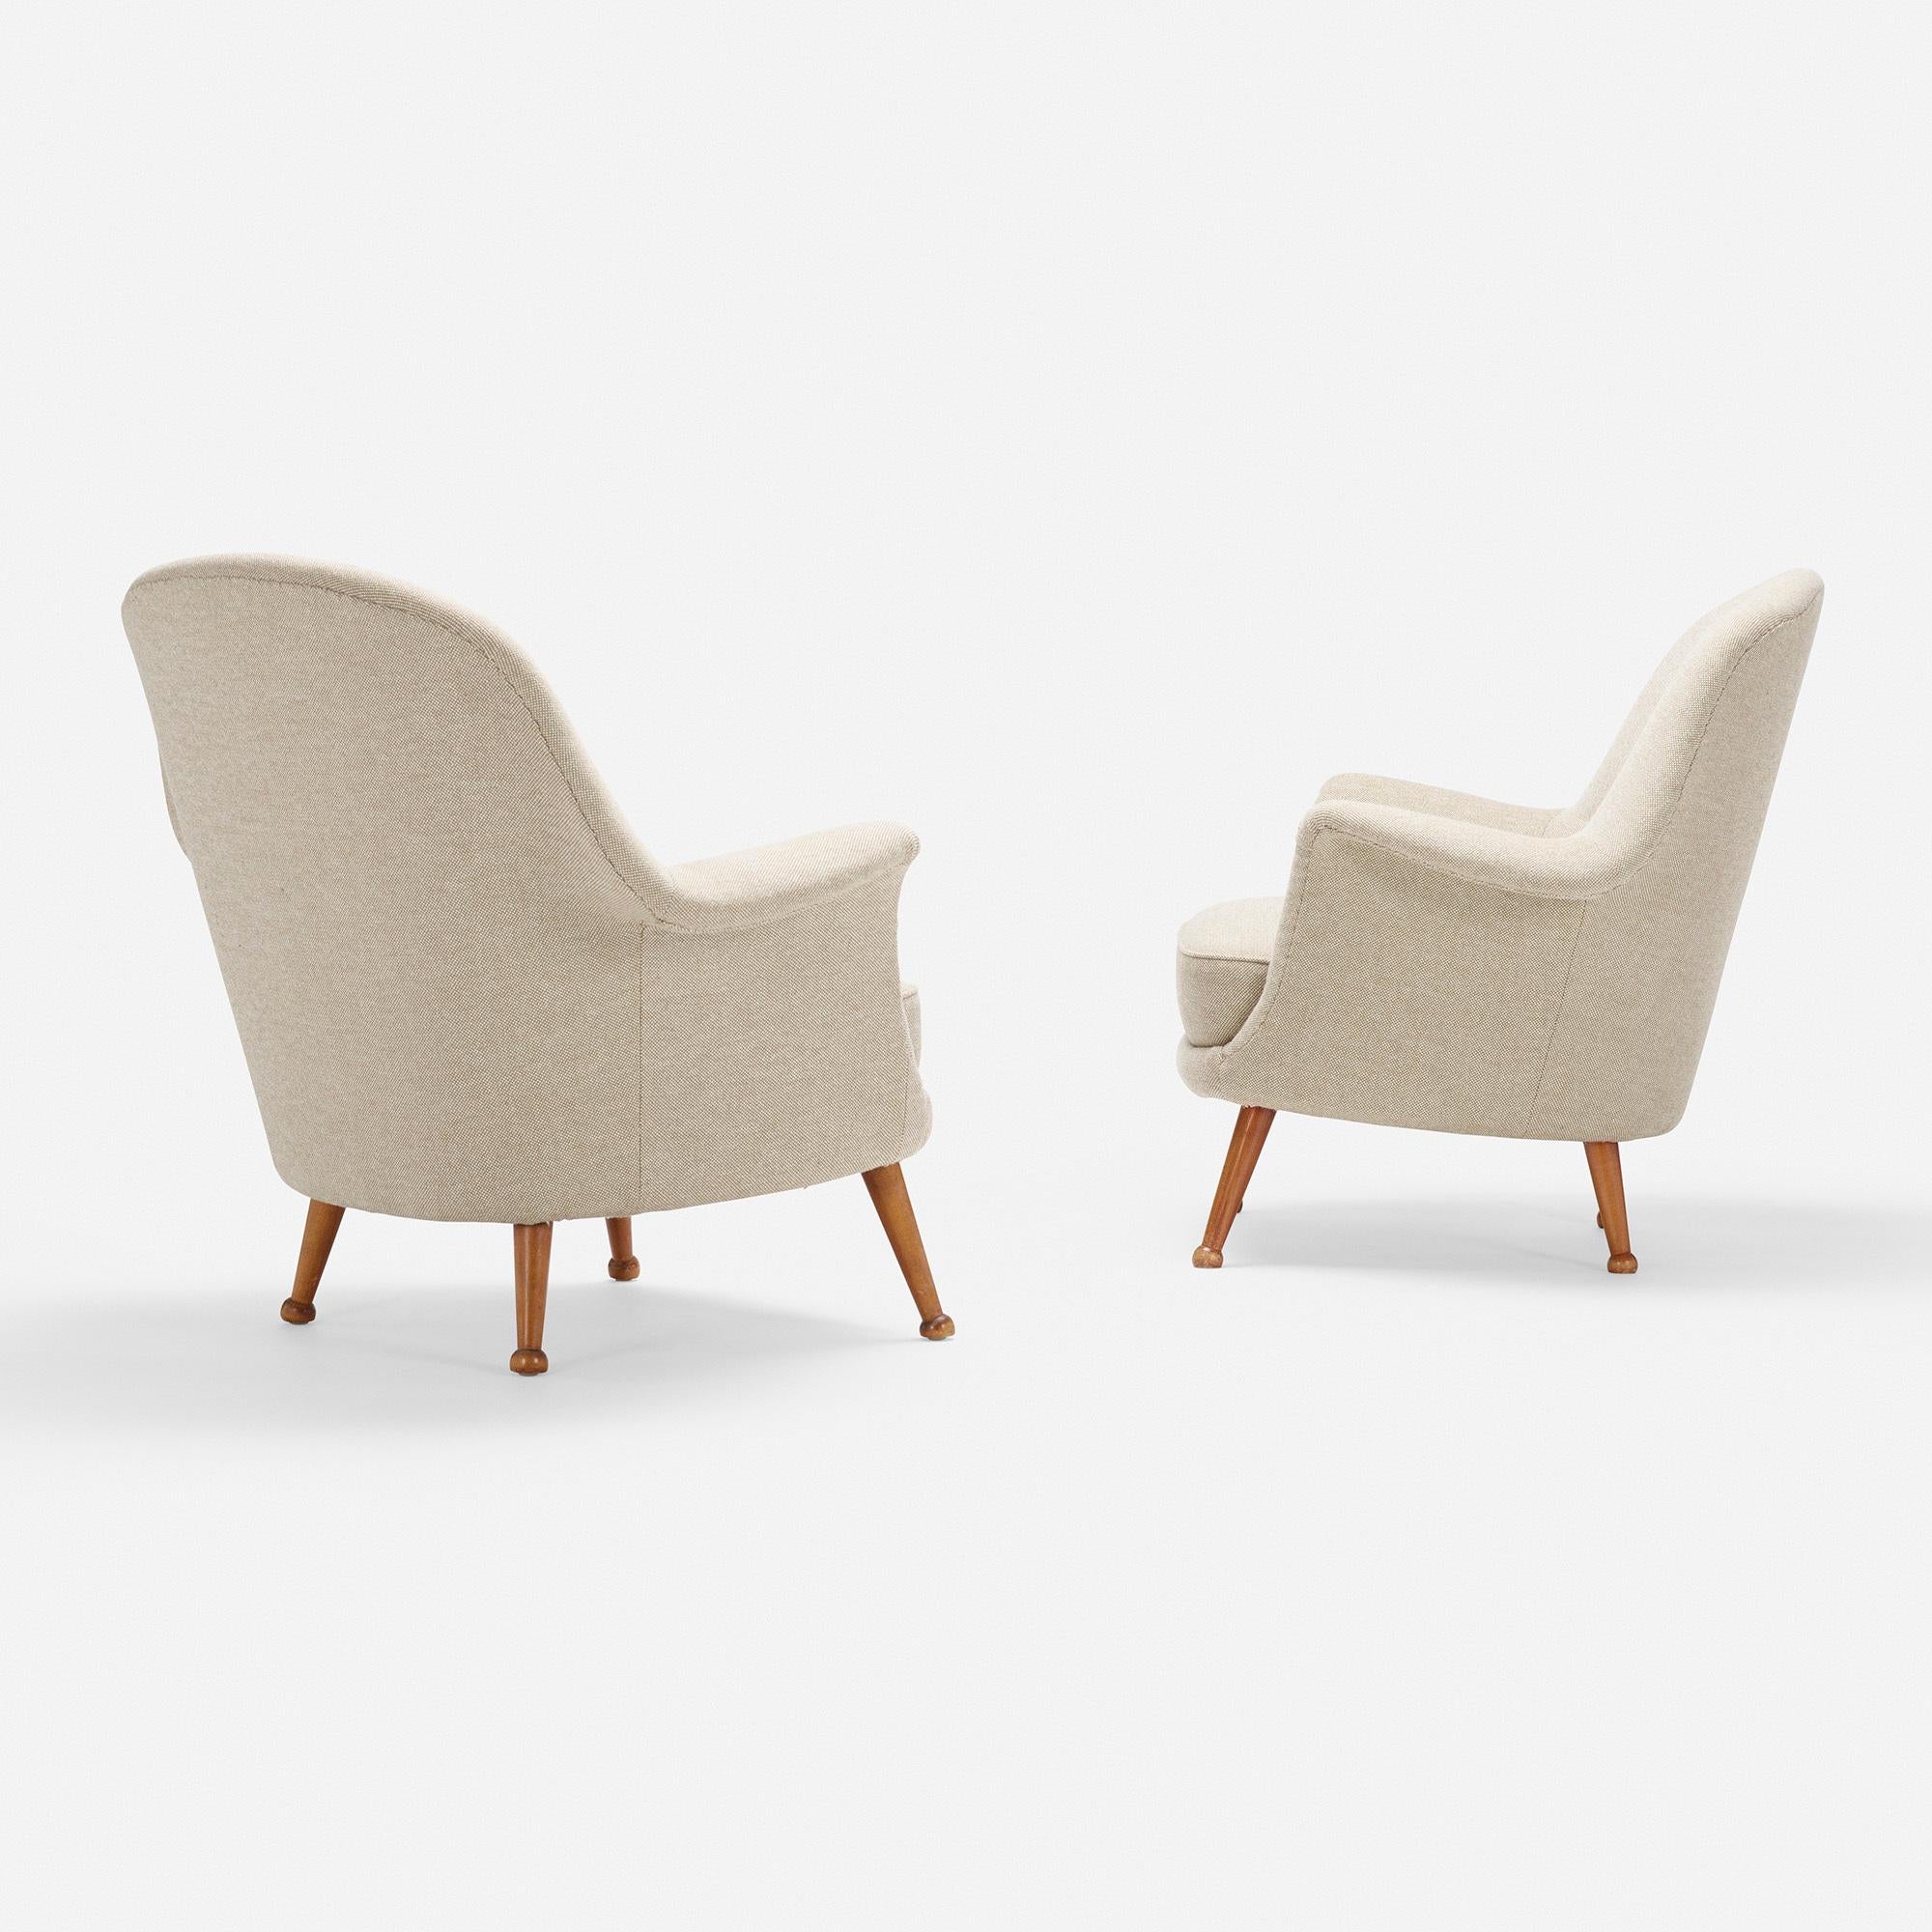 Pair of Divina lounge chairs by Arne Norell, circa 1965.

Made by Norell Möbel, Sweden, circa 1965.

Additional information:
Material: upholstery, beech.
Size: 36 width × 30.5 depth × 33 height inches. Seat height: 15.5 inches.

Condition: